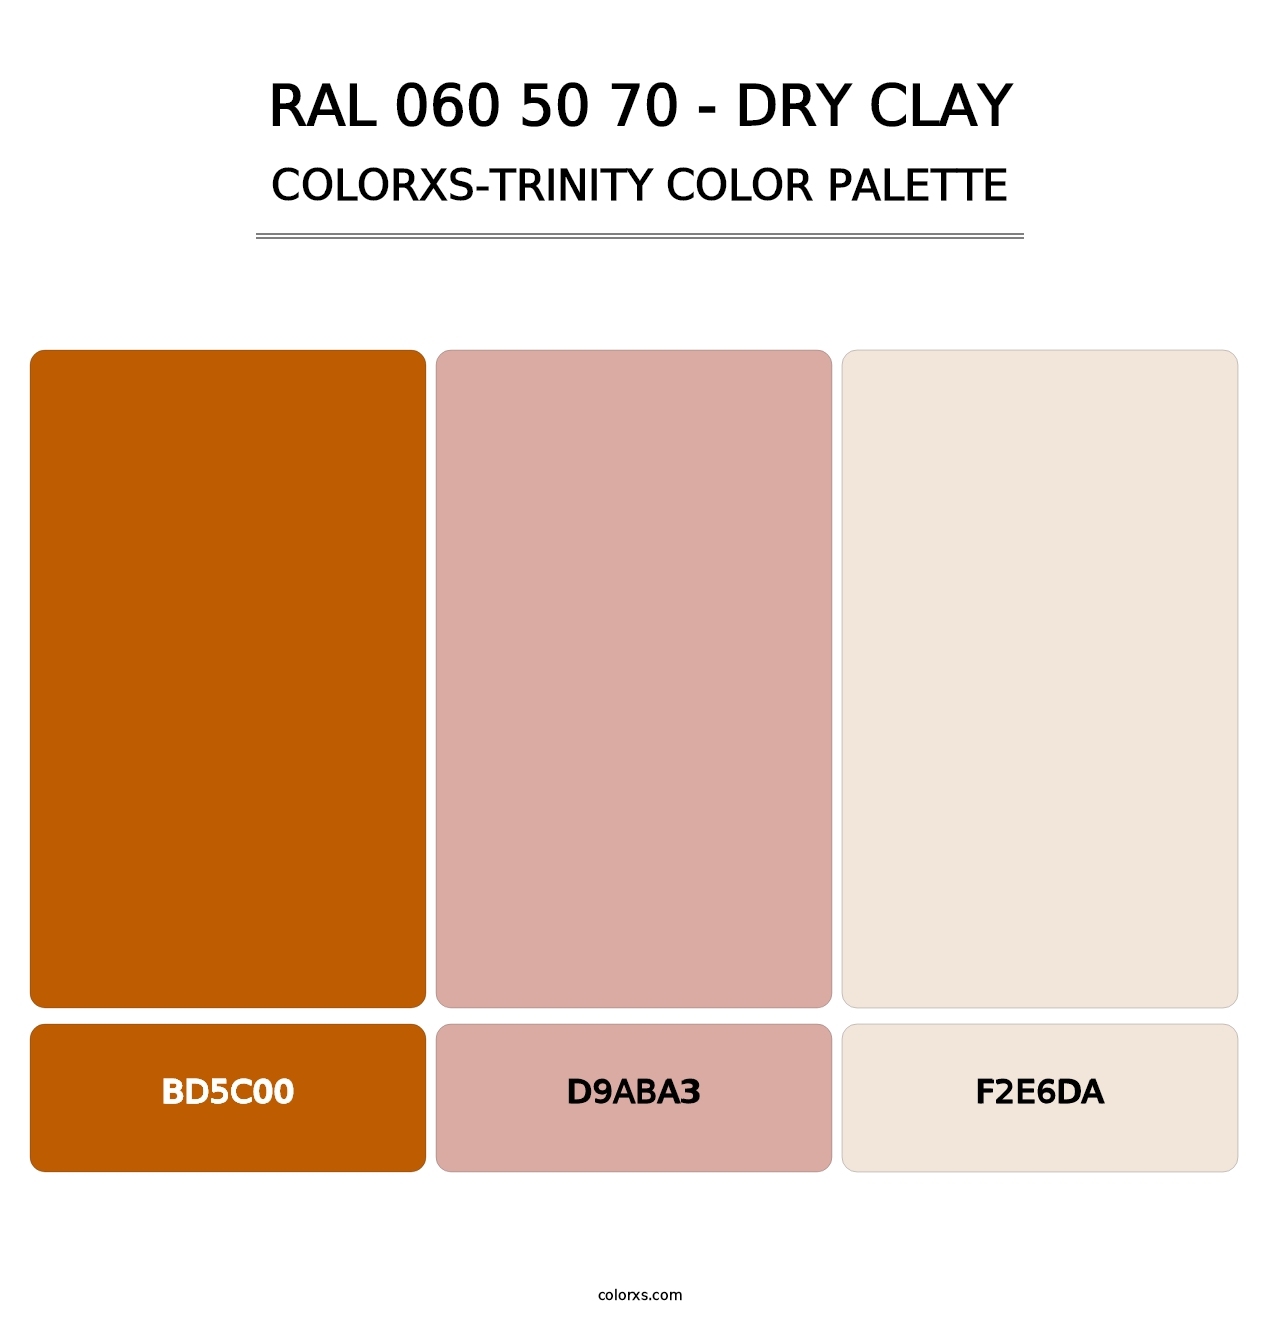 RAL 060 50 70 - Dry Clay - Colorxs Trinity Palette